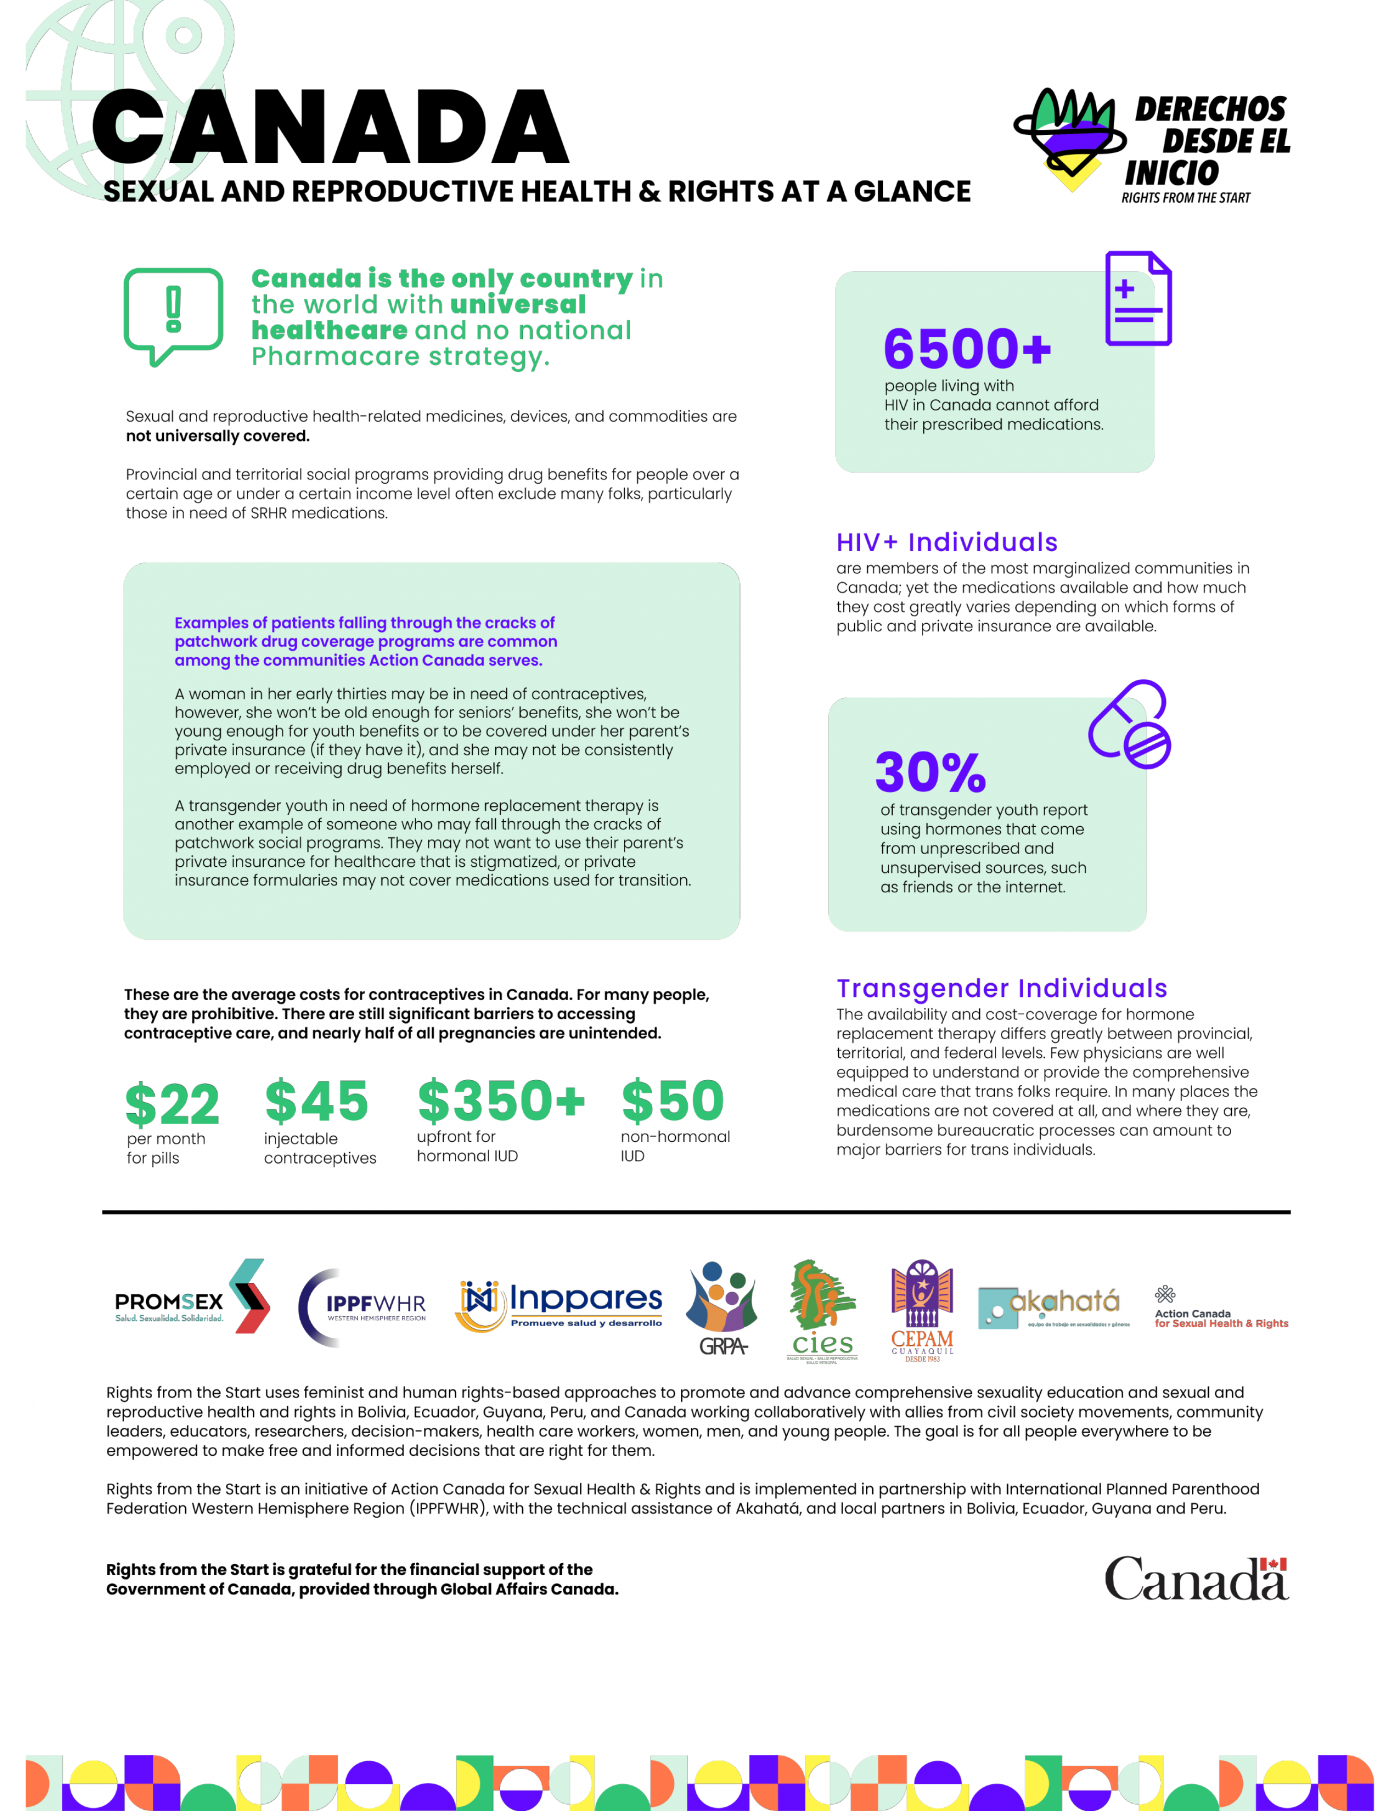 Infographics related to SRHR in Canada